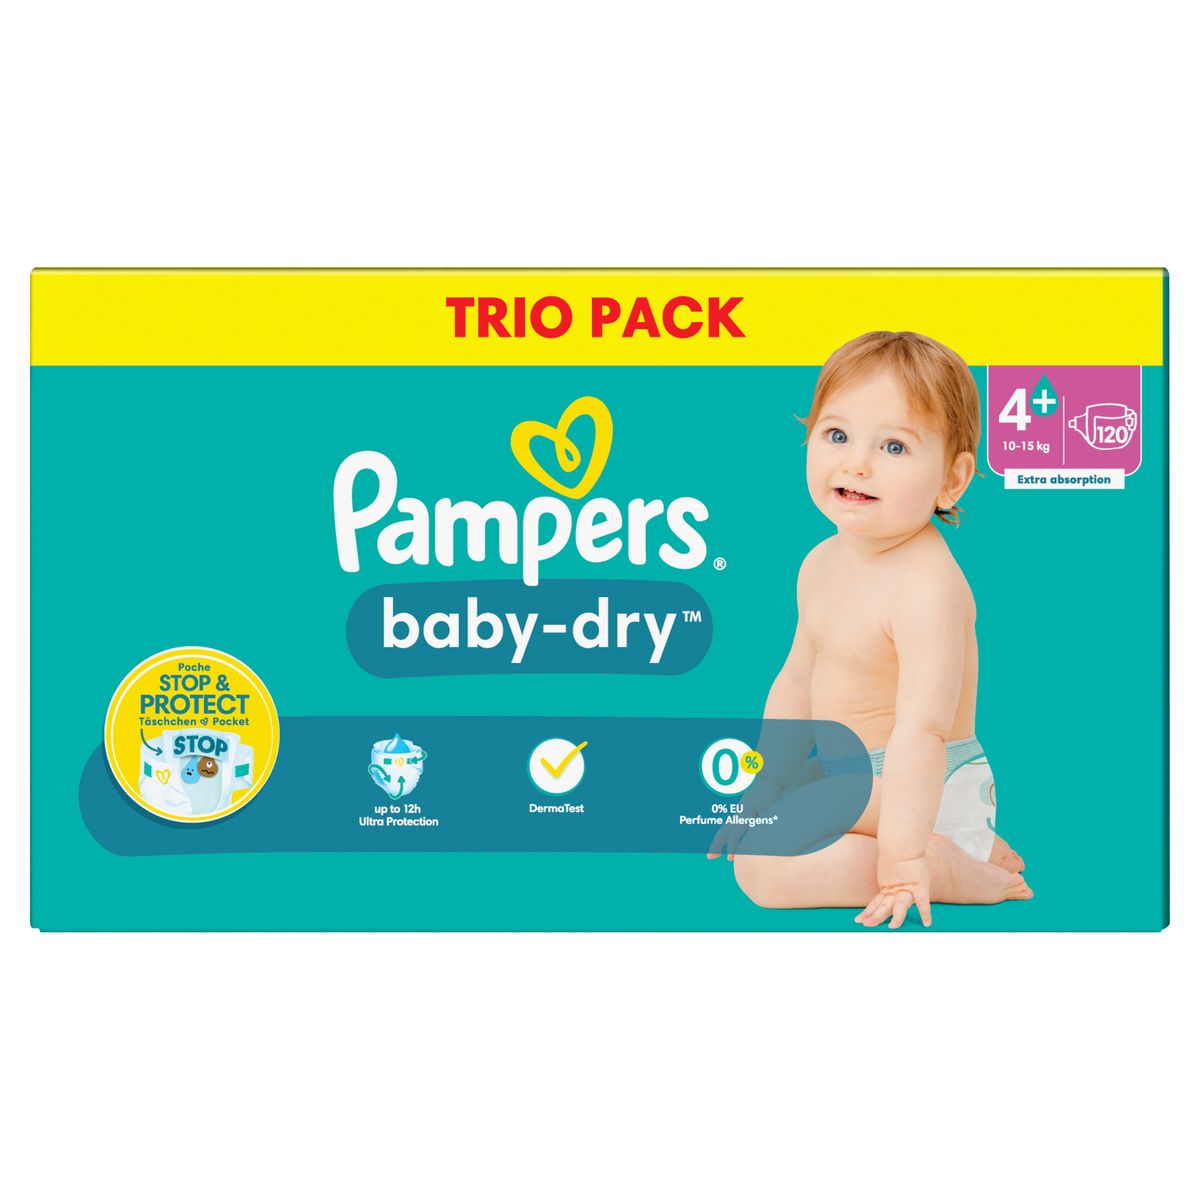 PAMPERS Harmonie couches taille 4 84 couches pas cher 